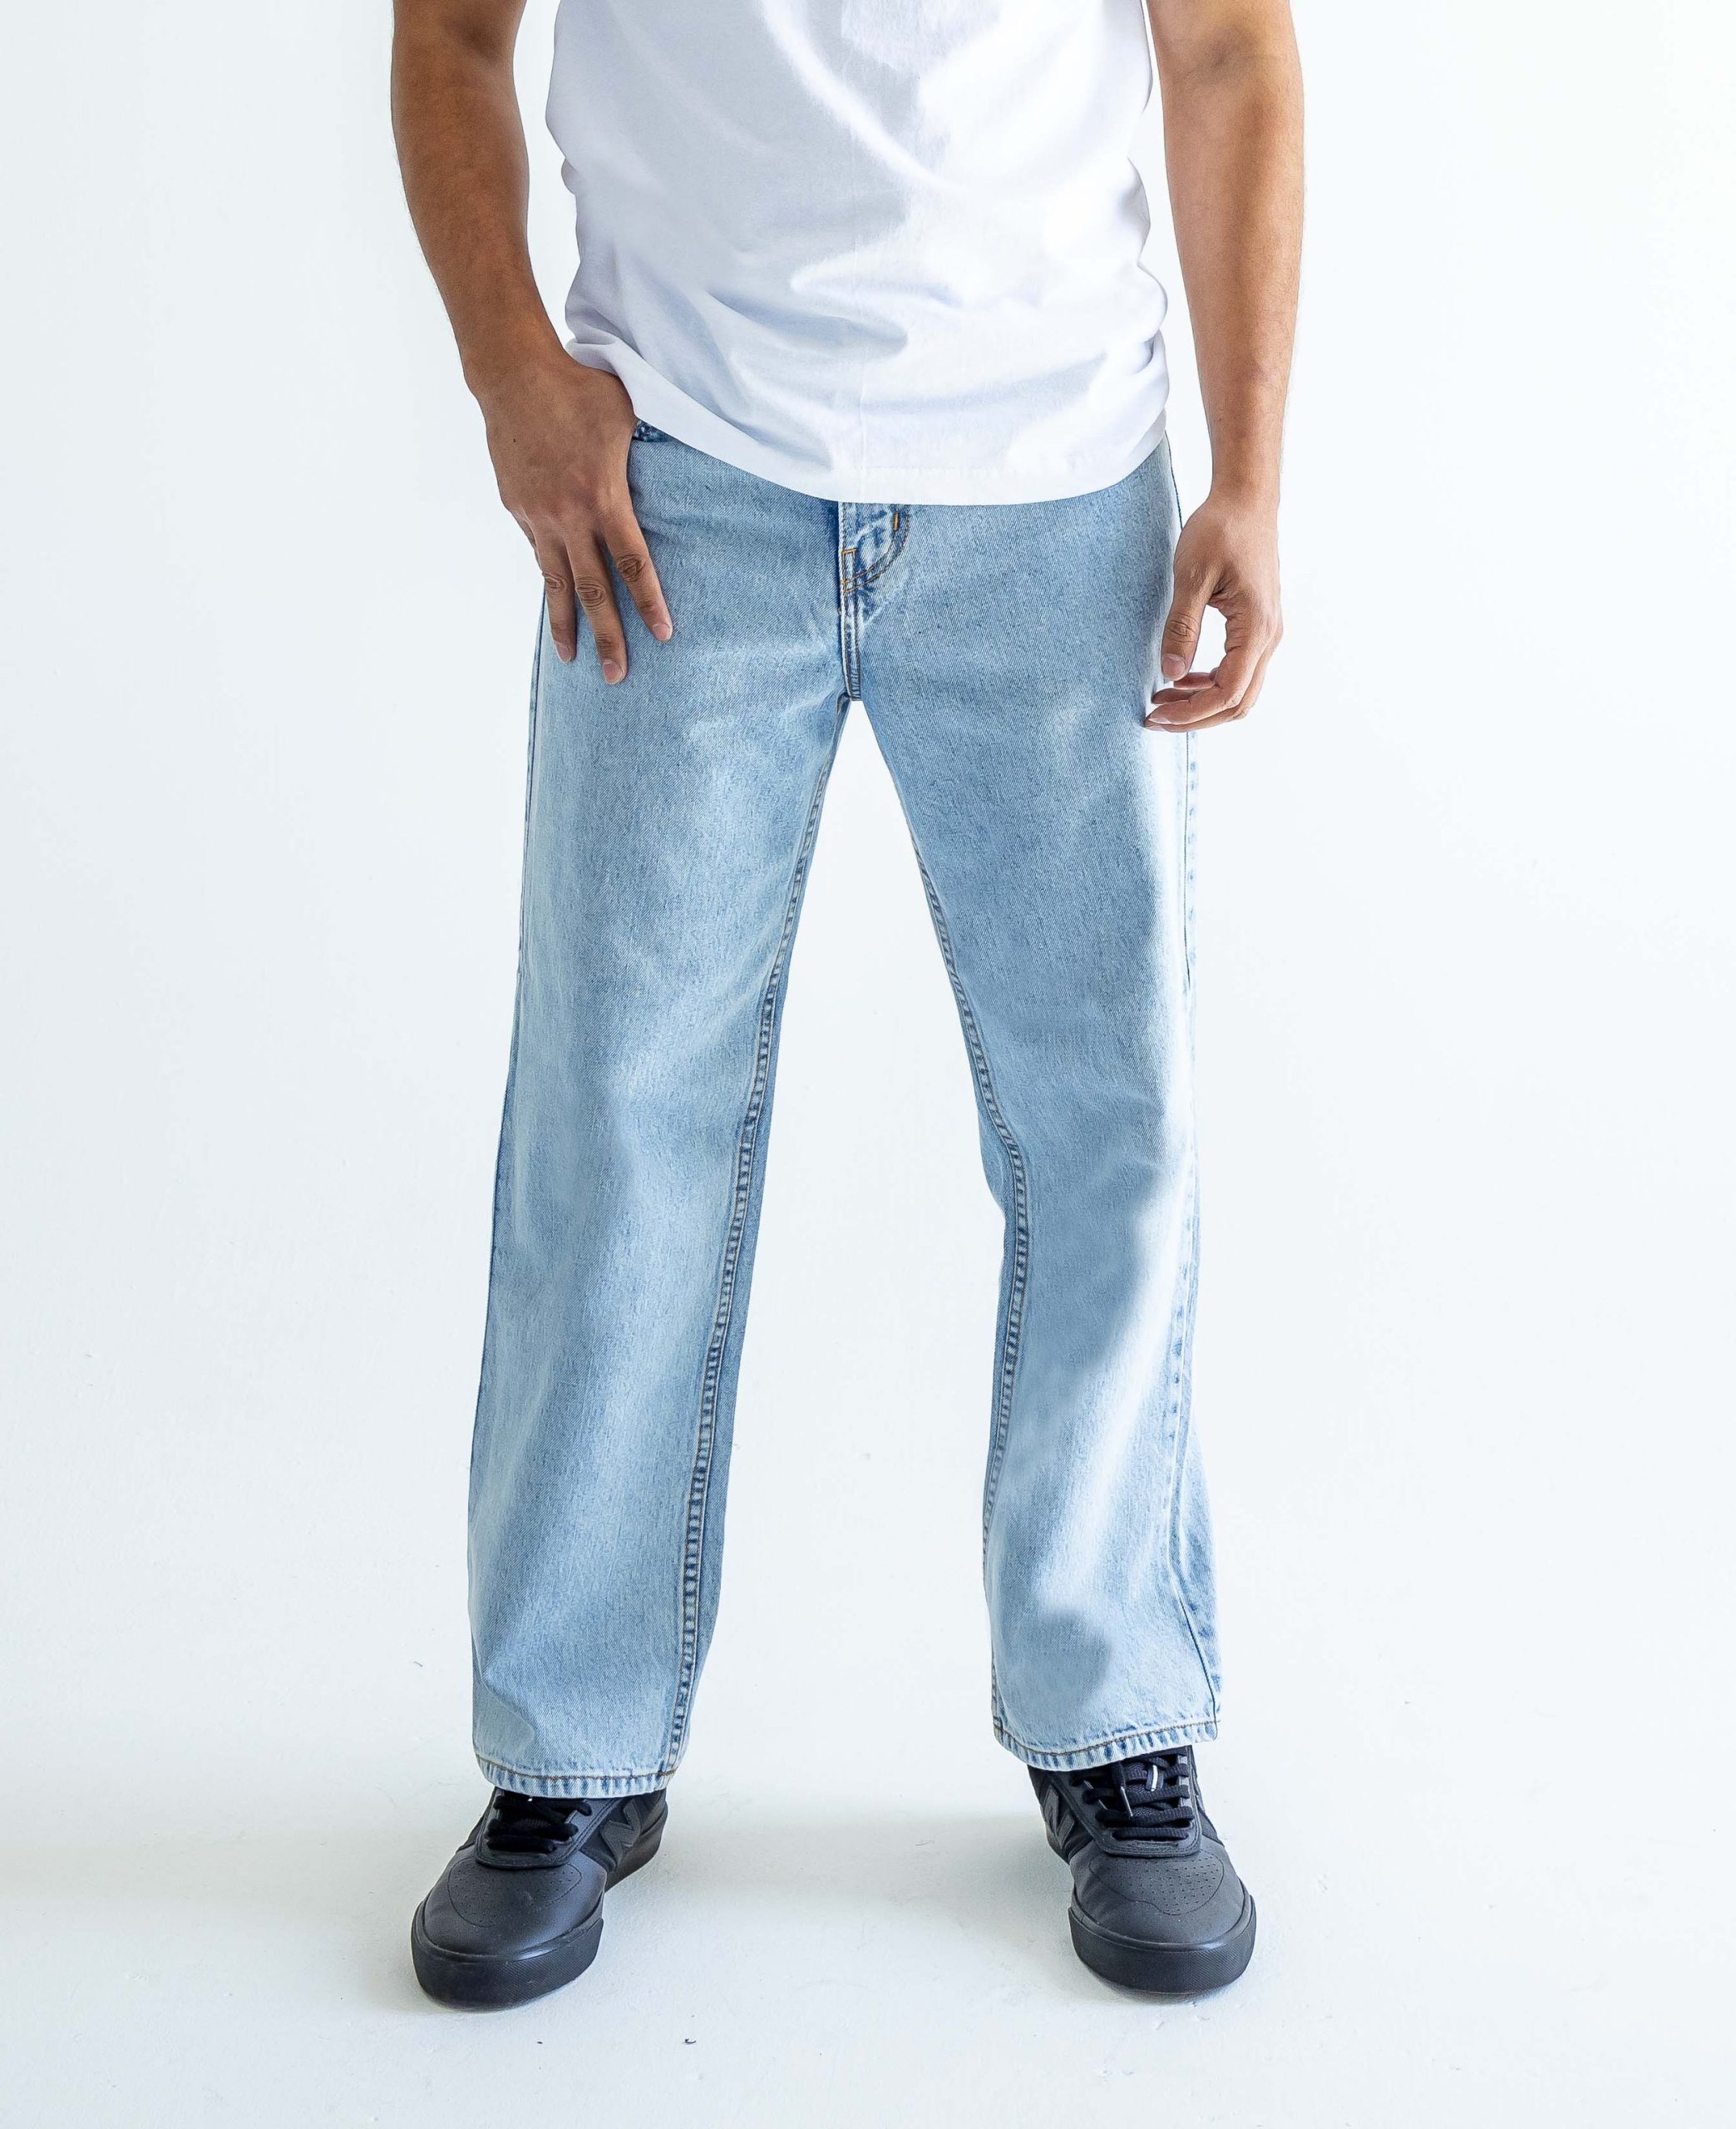 Baggy skate jeans: Embrace Skate Culture with it缩略图